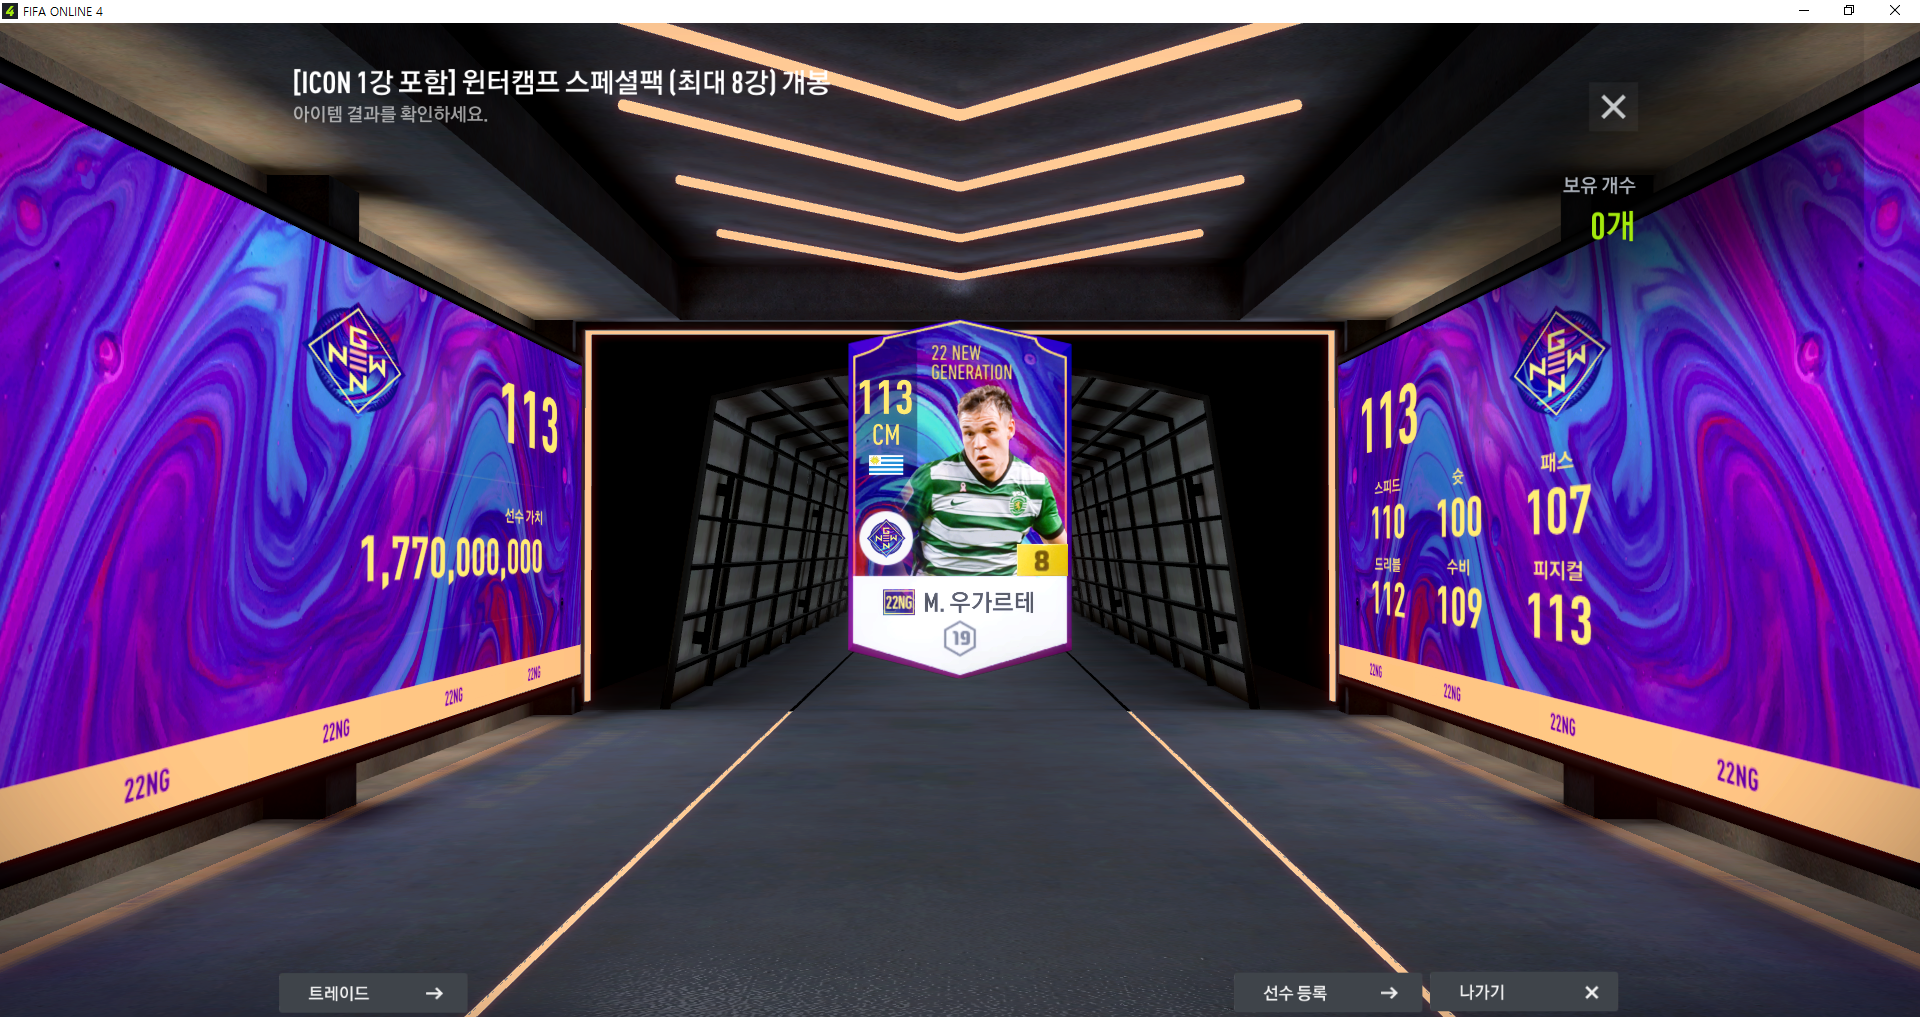 FIFA ONLINE 4 2022-12-22 오후 7_47_06.png